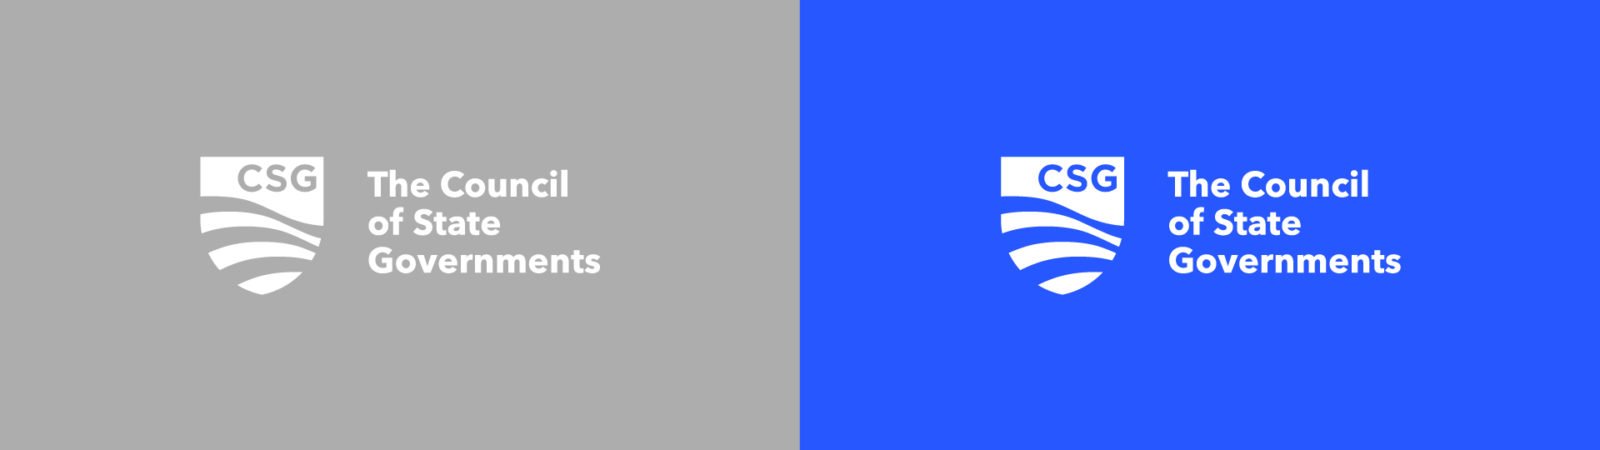 Brand identity for The Council of State Governments